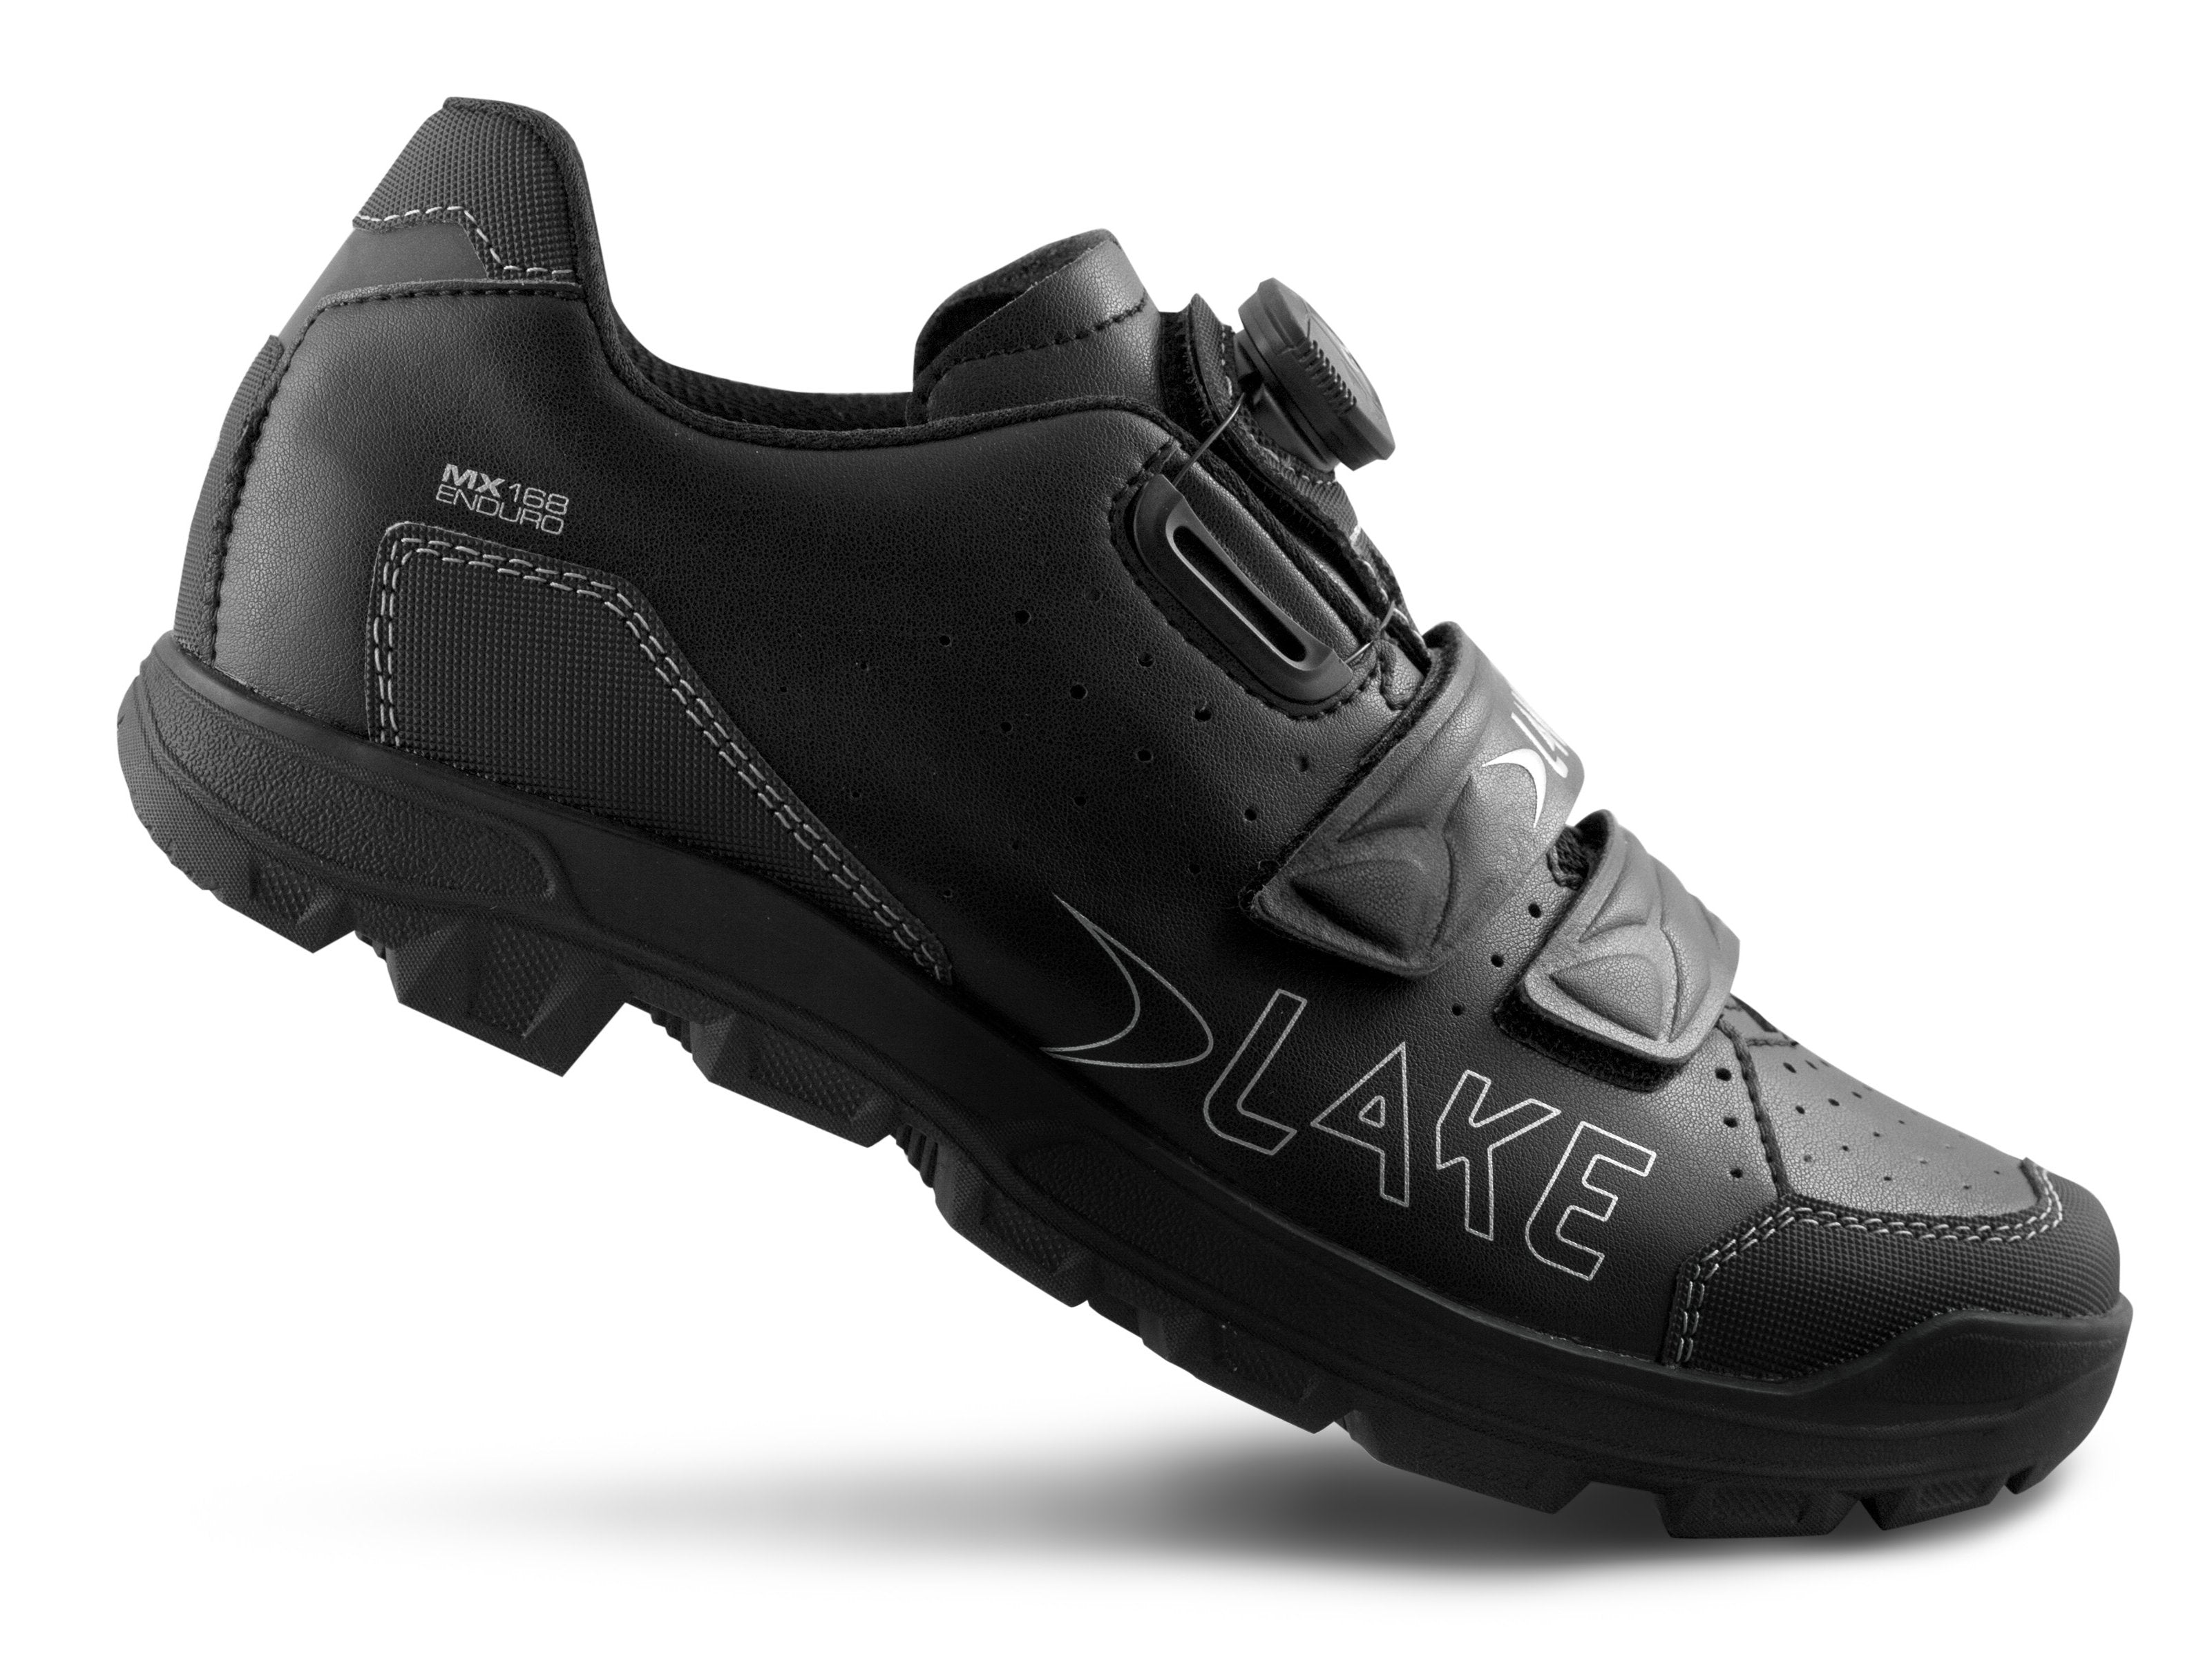 bike shoes for sale